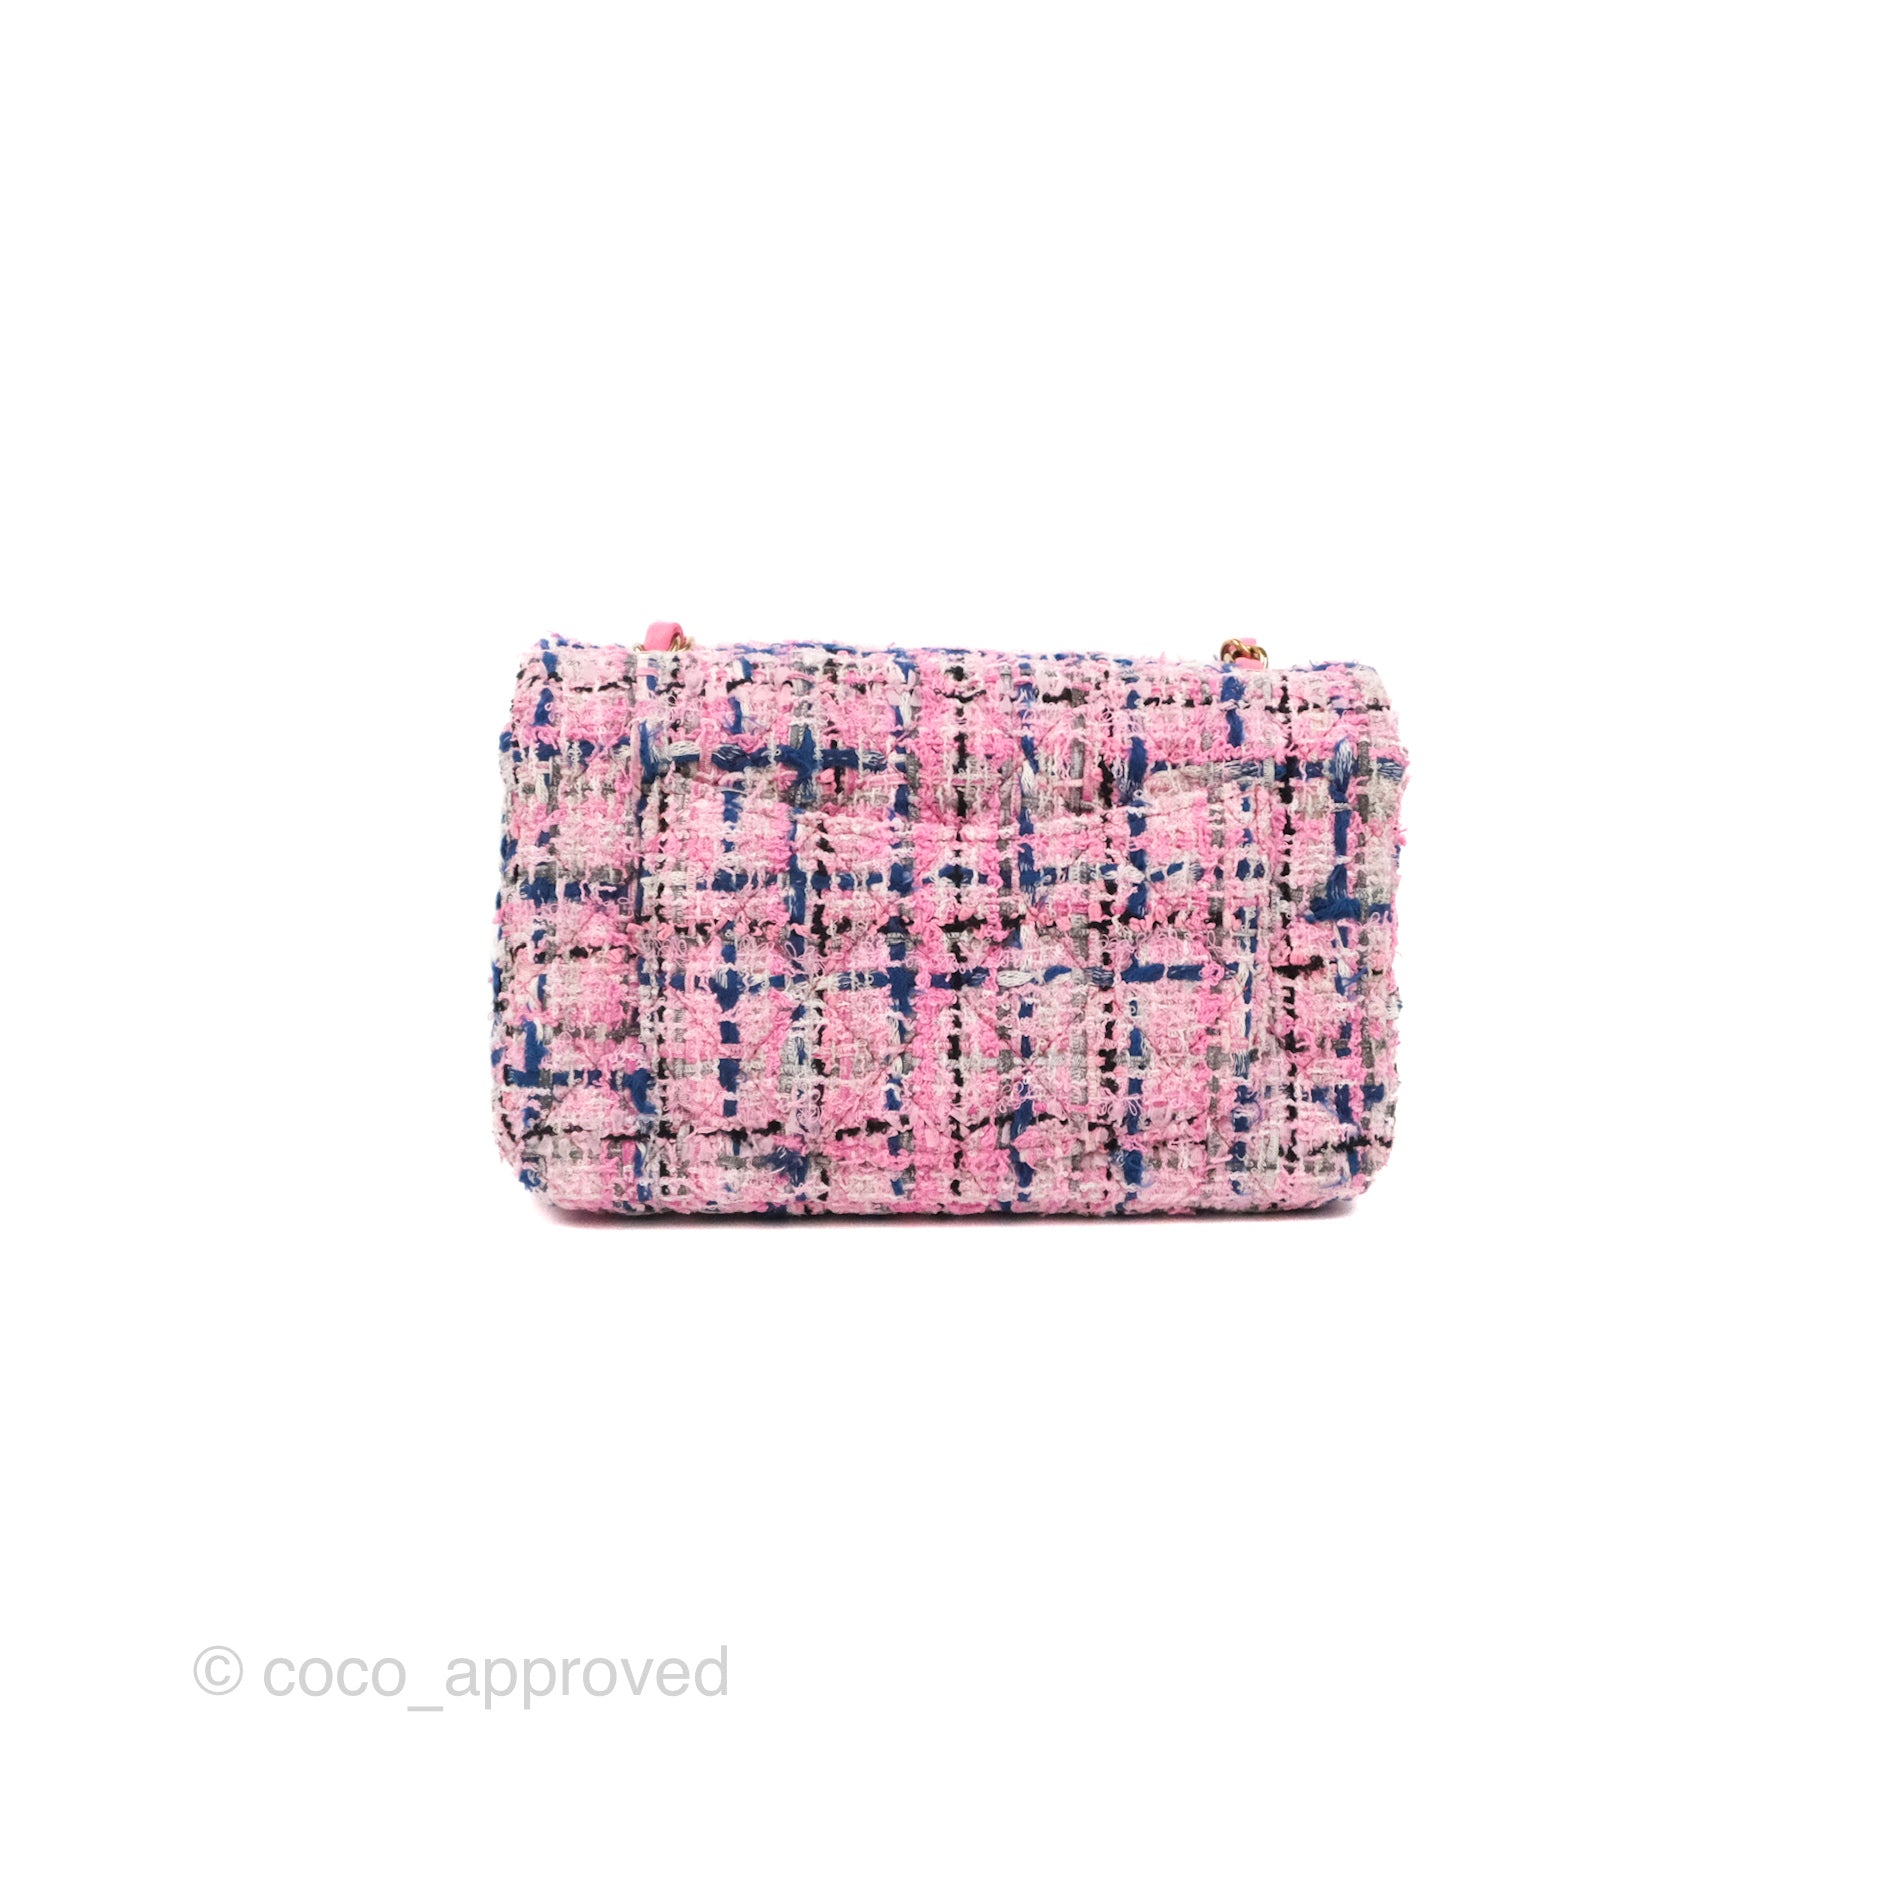 Sold at Auction: CHANEL, TWEED WALLET ON CHAIN